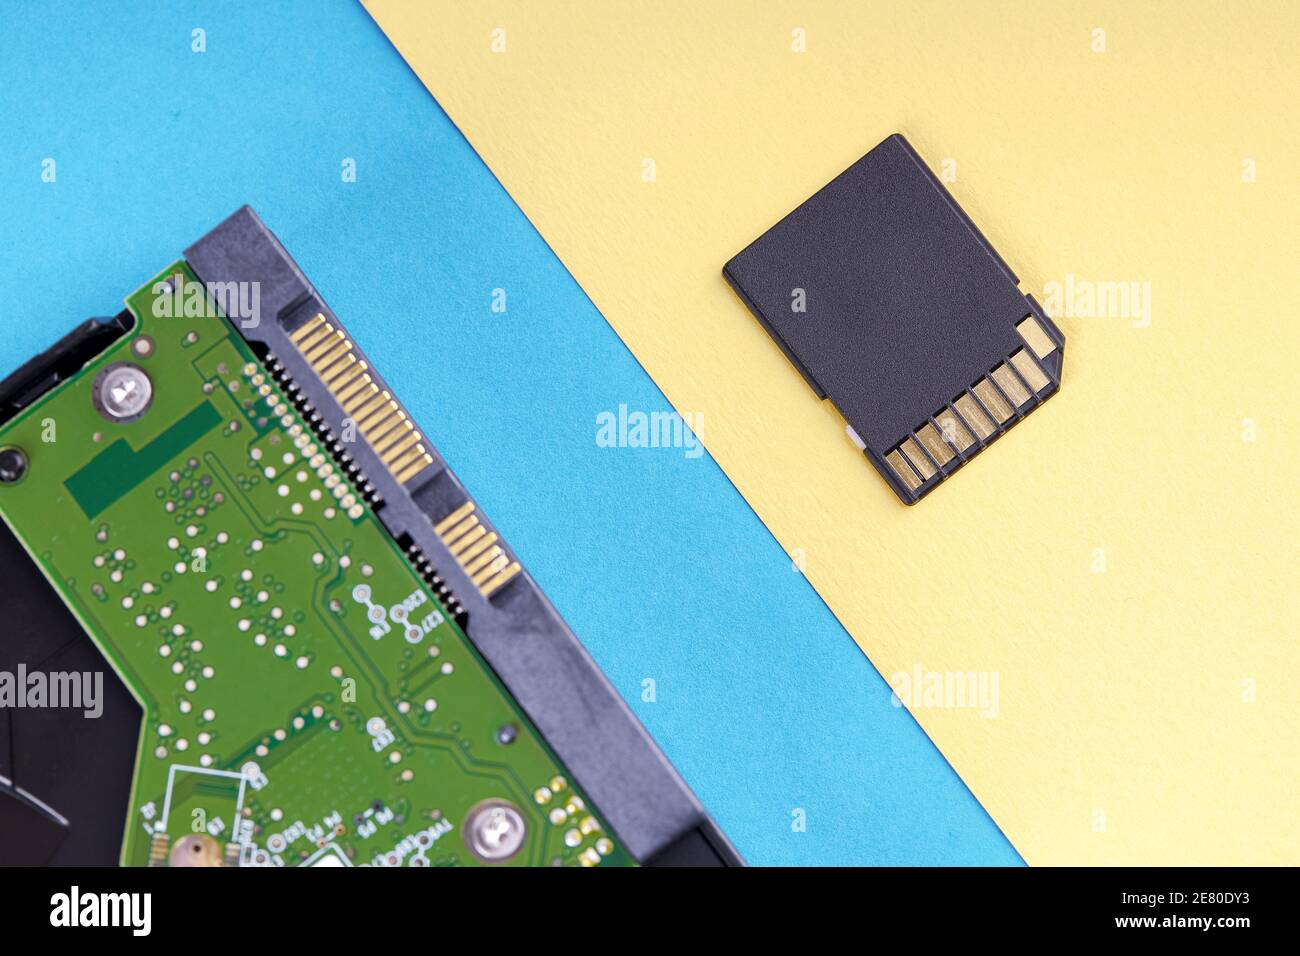 desktop pc hard drive disk or hdd on blue background and small black sd memory card on bright yellow background. pastel colors Stock Photo